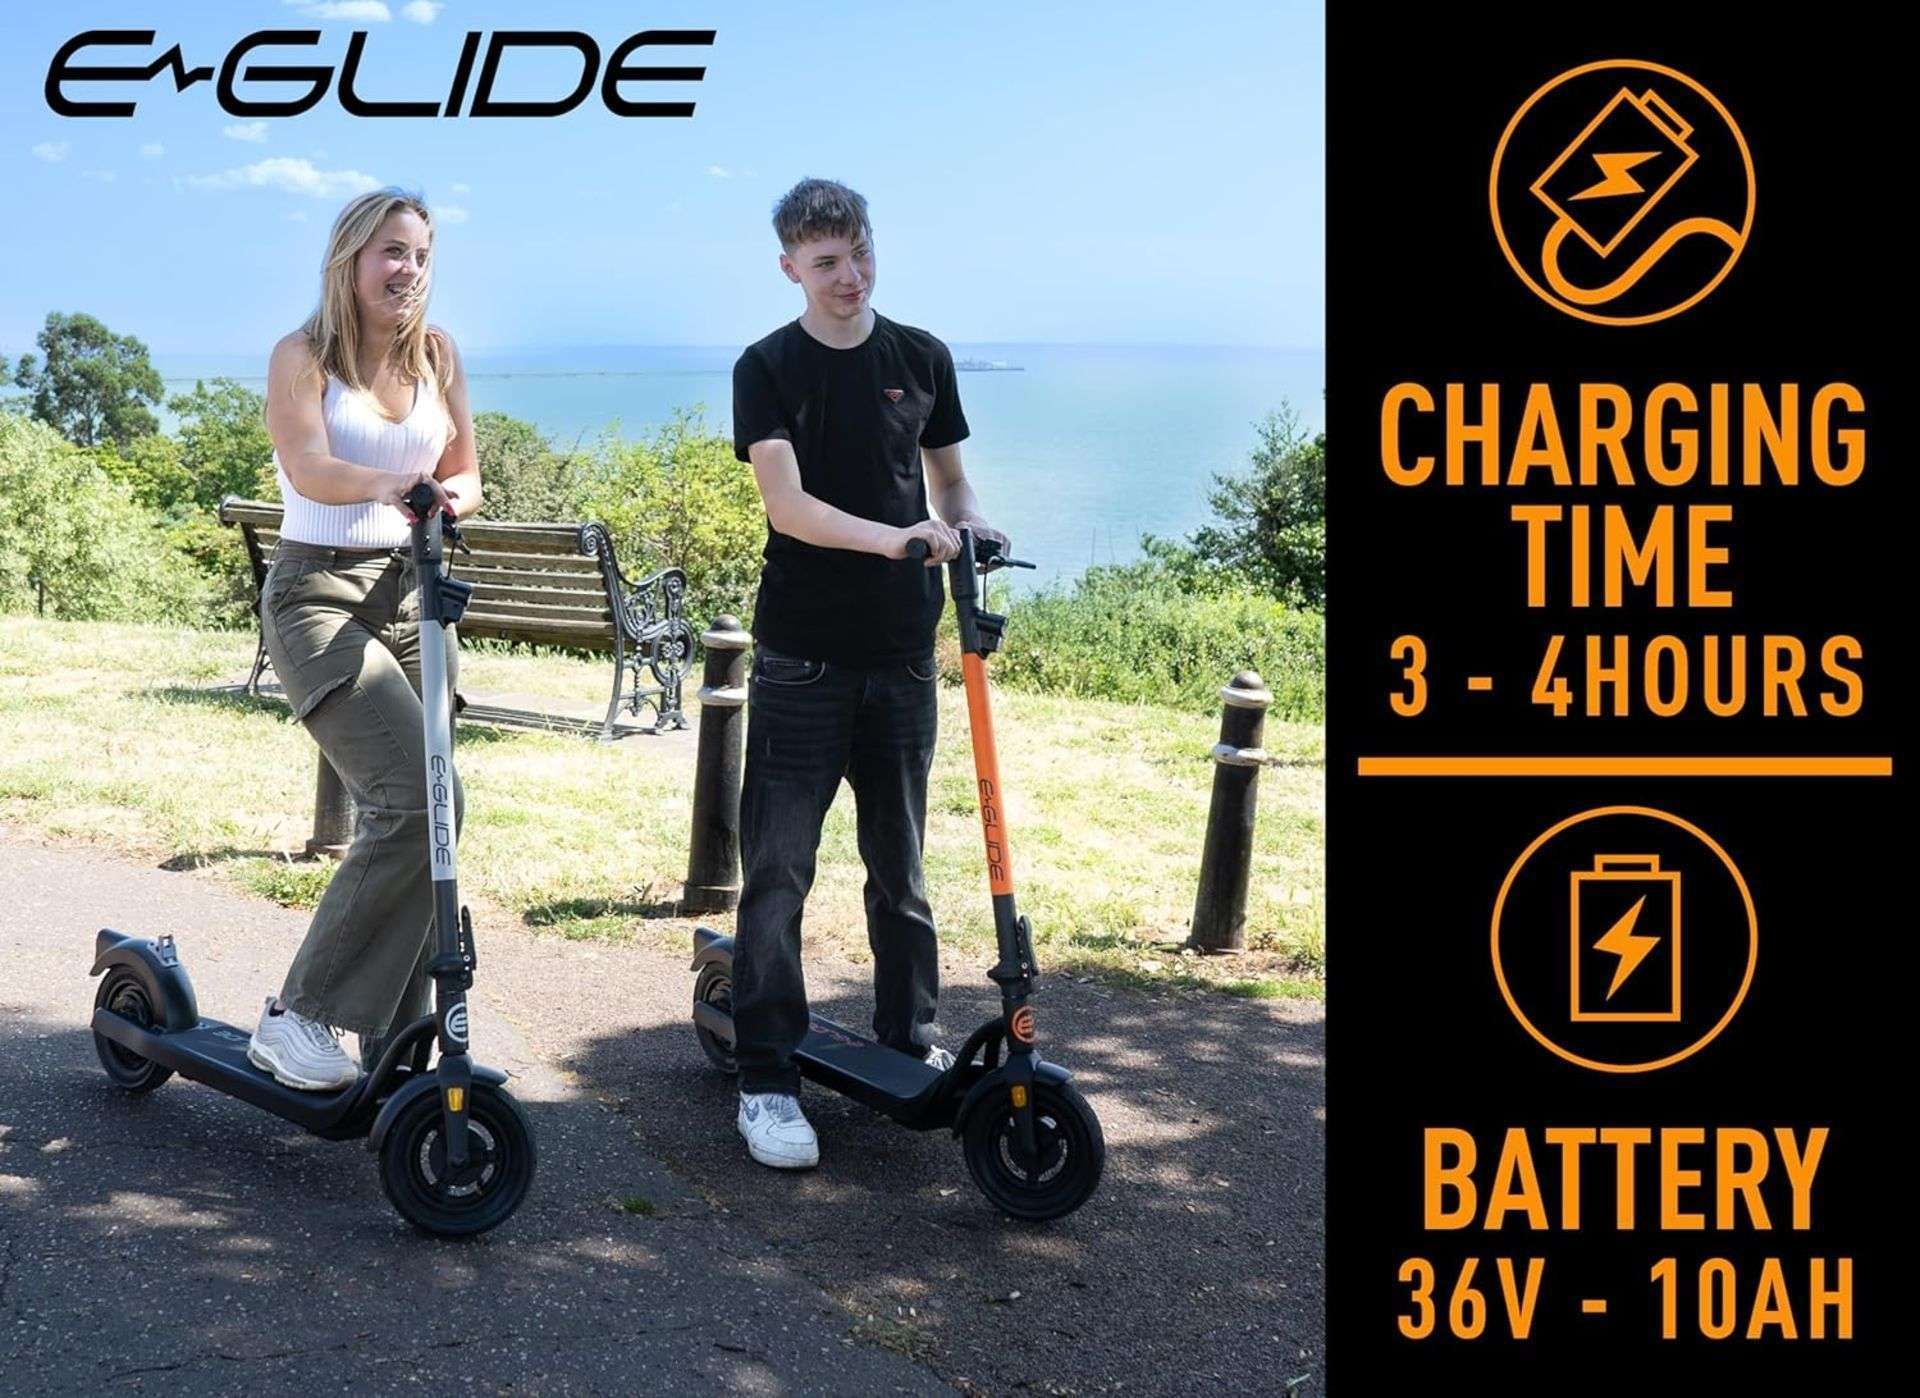 Trade Lot 4 x Brand New E-Glide V2 Electric Scooter Orange and Black RRP £599, Introducing a sleek - Bild 4 aus 5